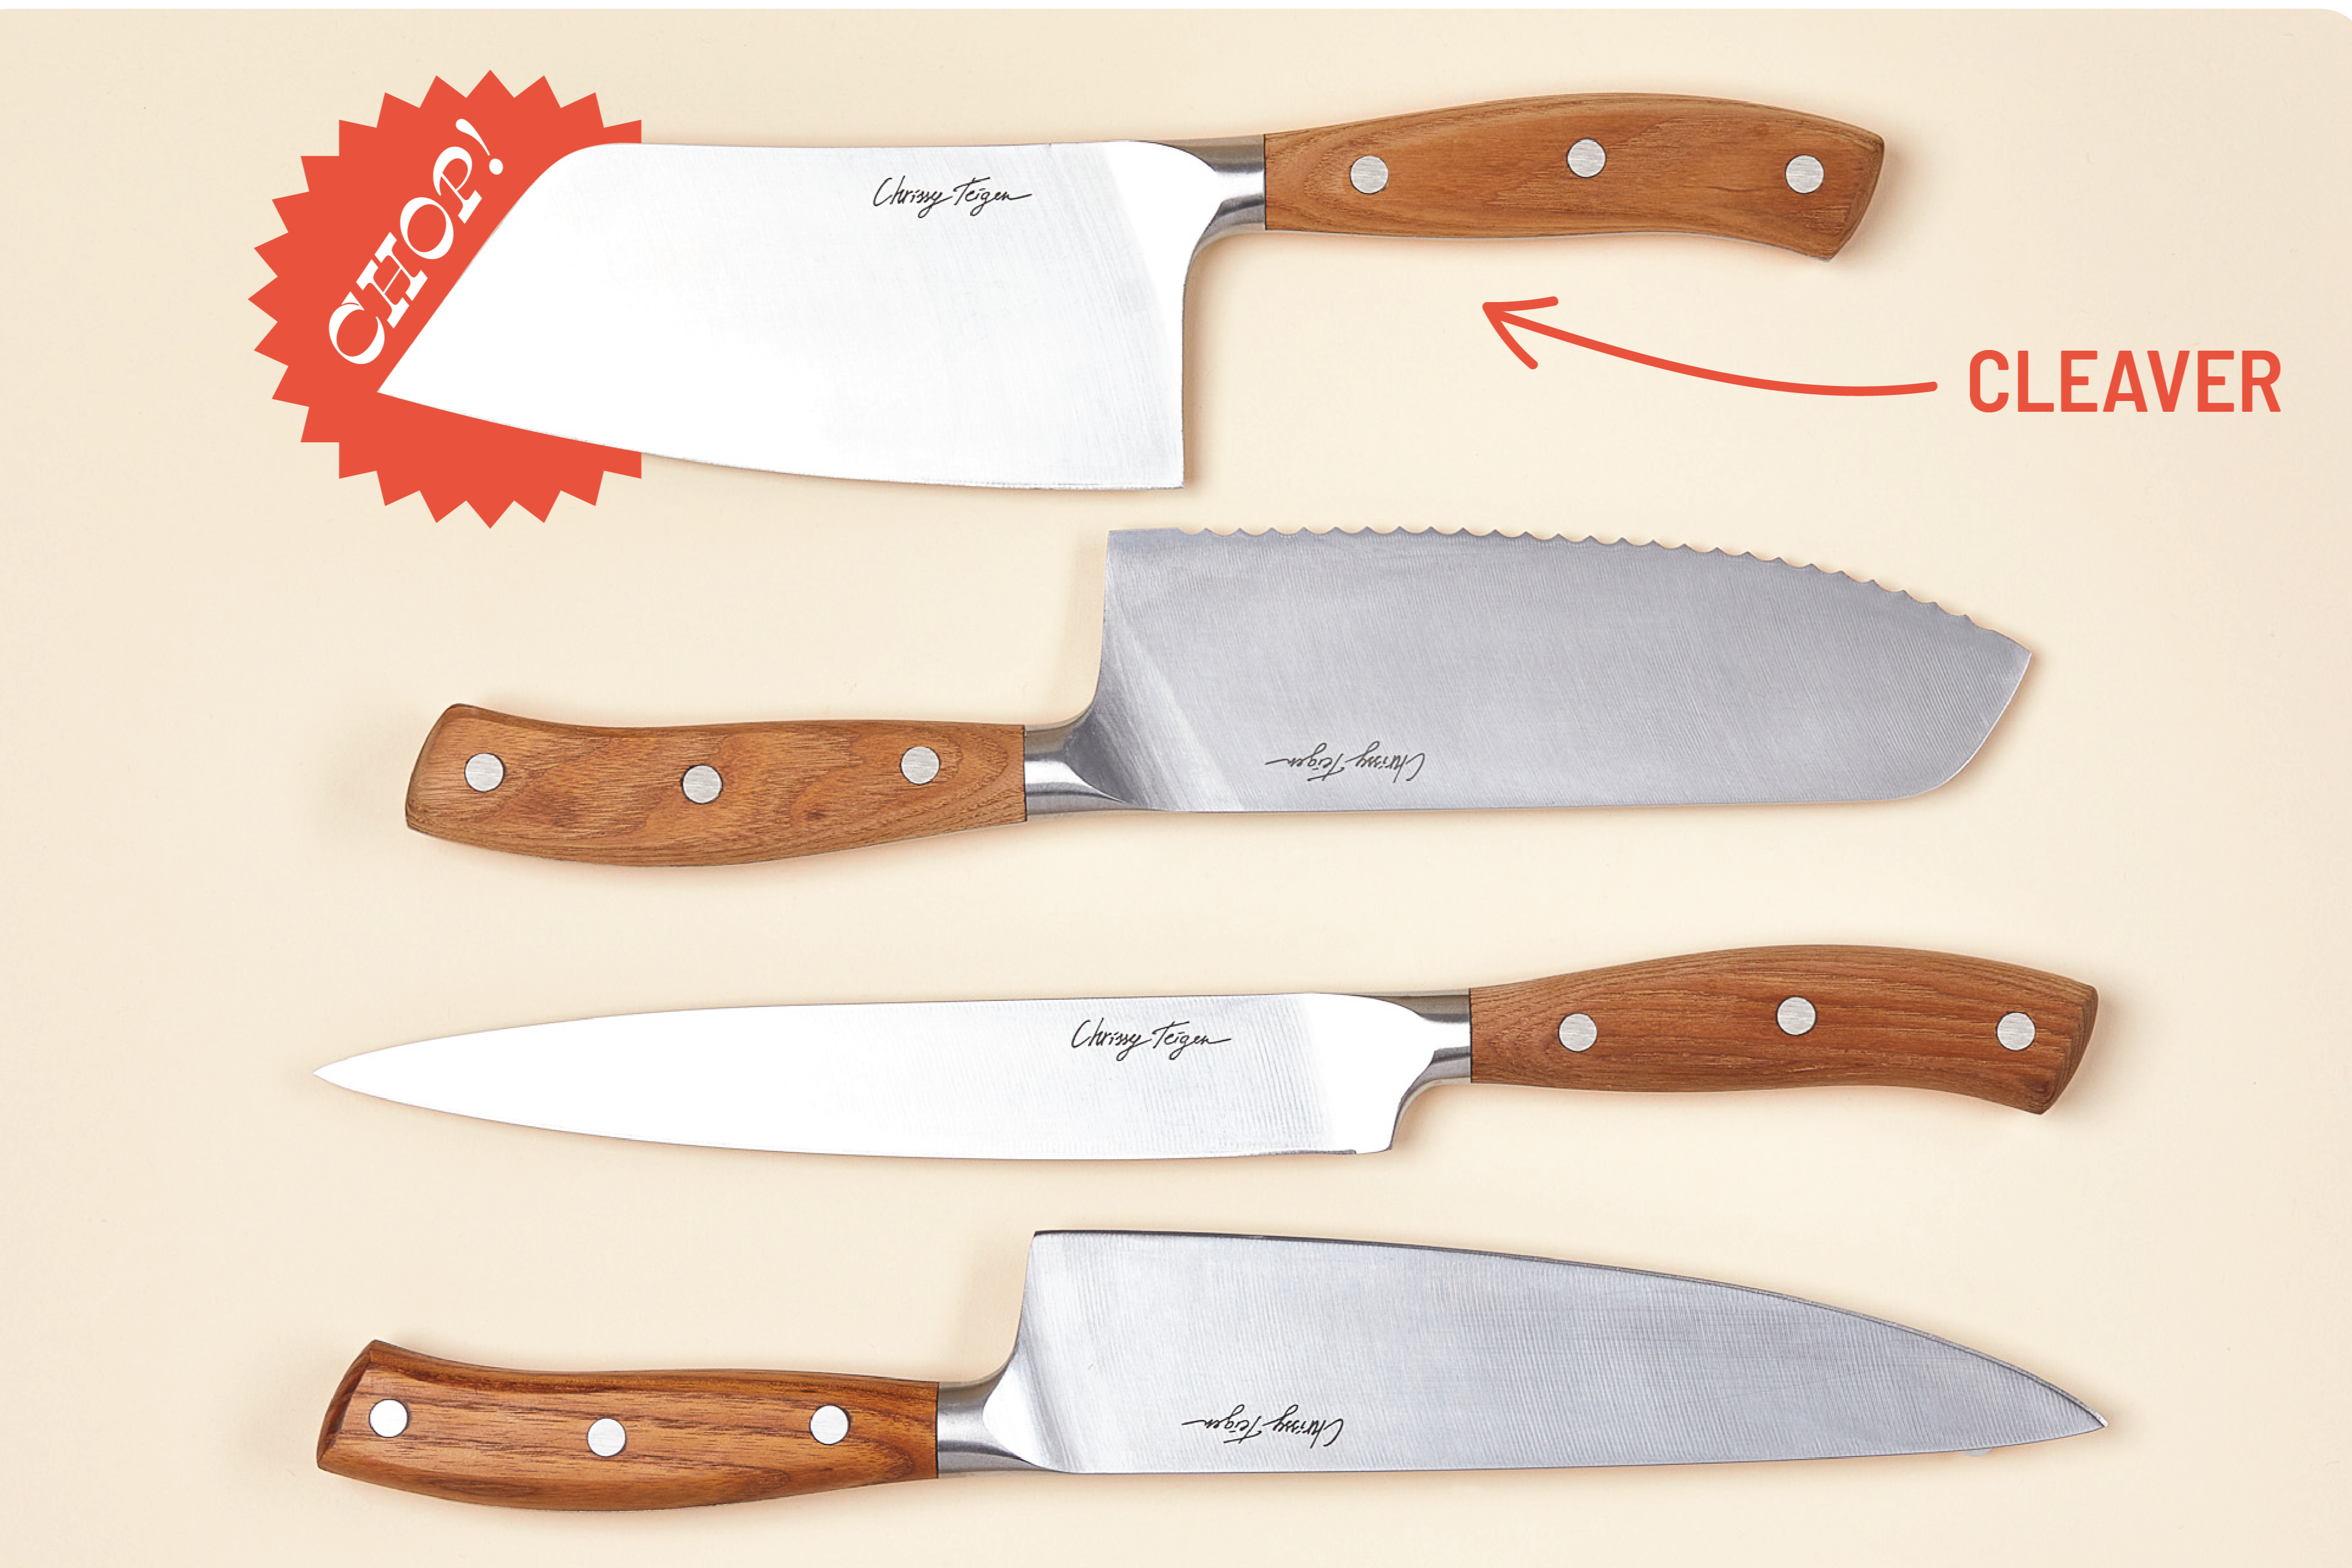 A Cleaver Should Be Your New Go-To Knife—Here's How to Use It